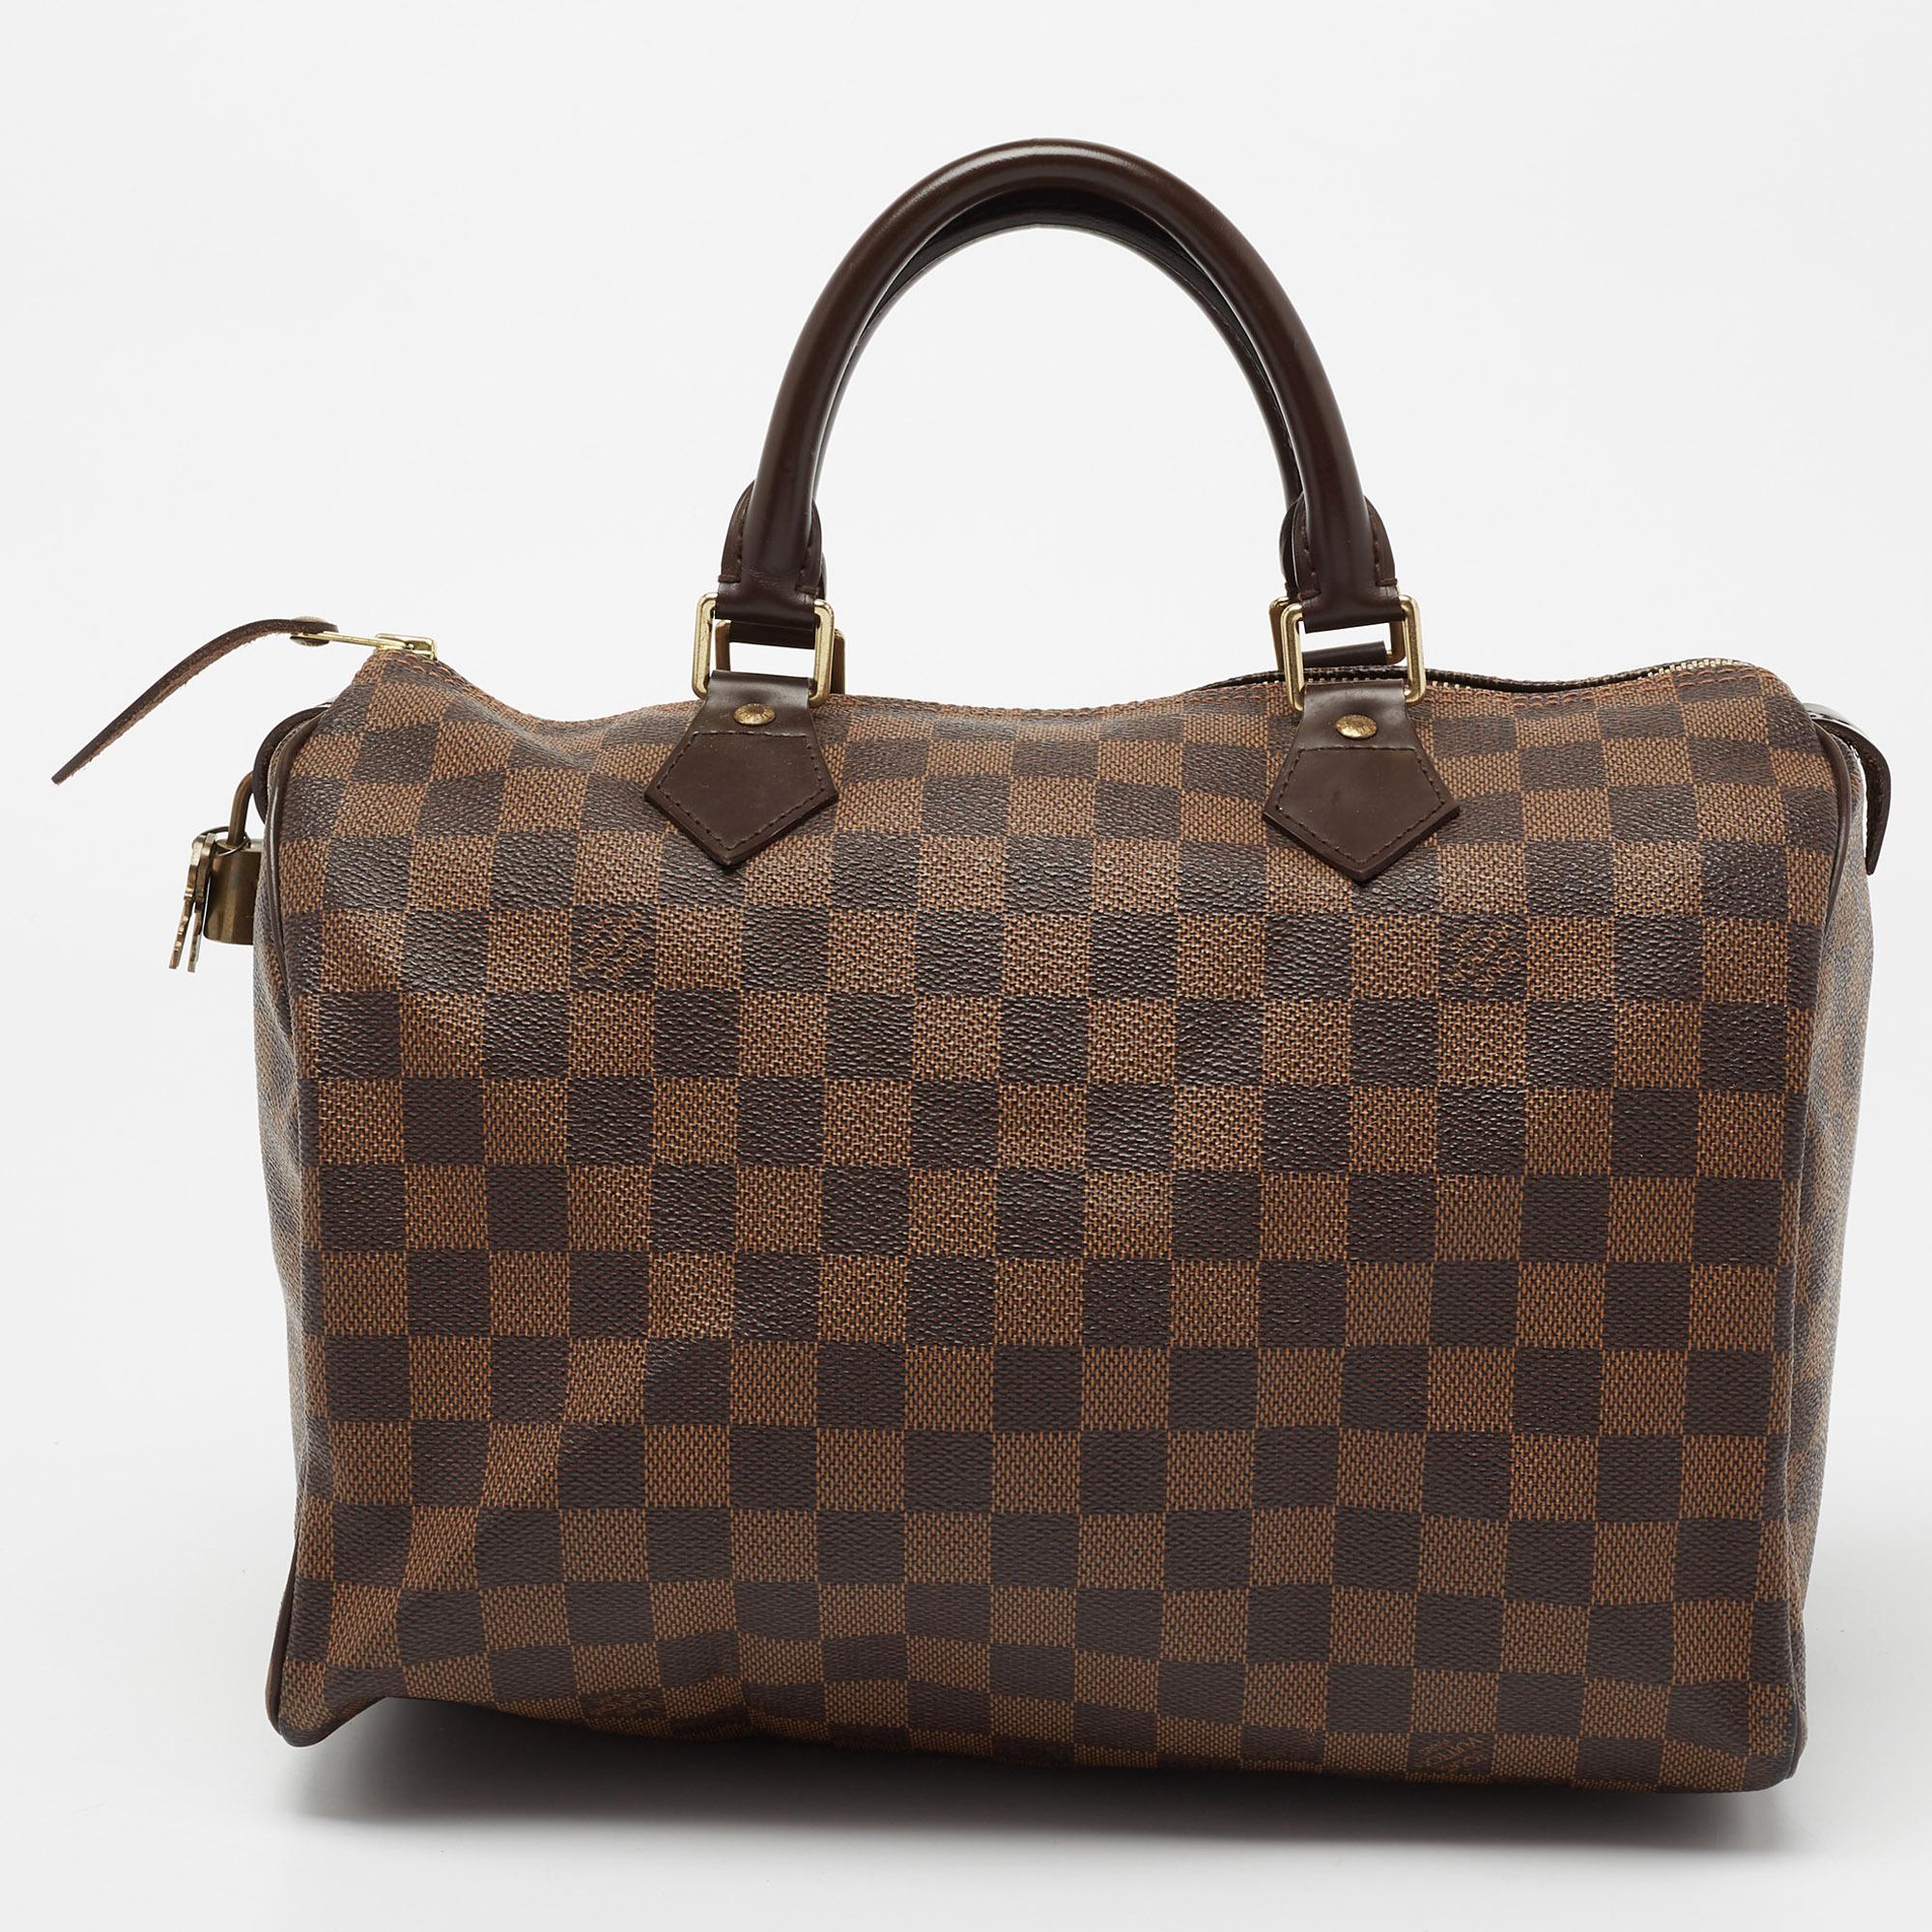 Created to provide you with everyday ease, this Louis Vuitton Speedy 30 bag features dual handles and a roomy fabric-lined interior. The usage of the signature Damier Ebene canvas in its construction offers instant brand identification. Gold-tone